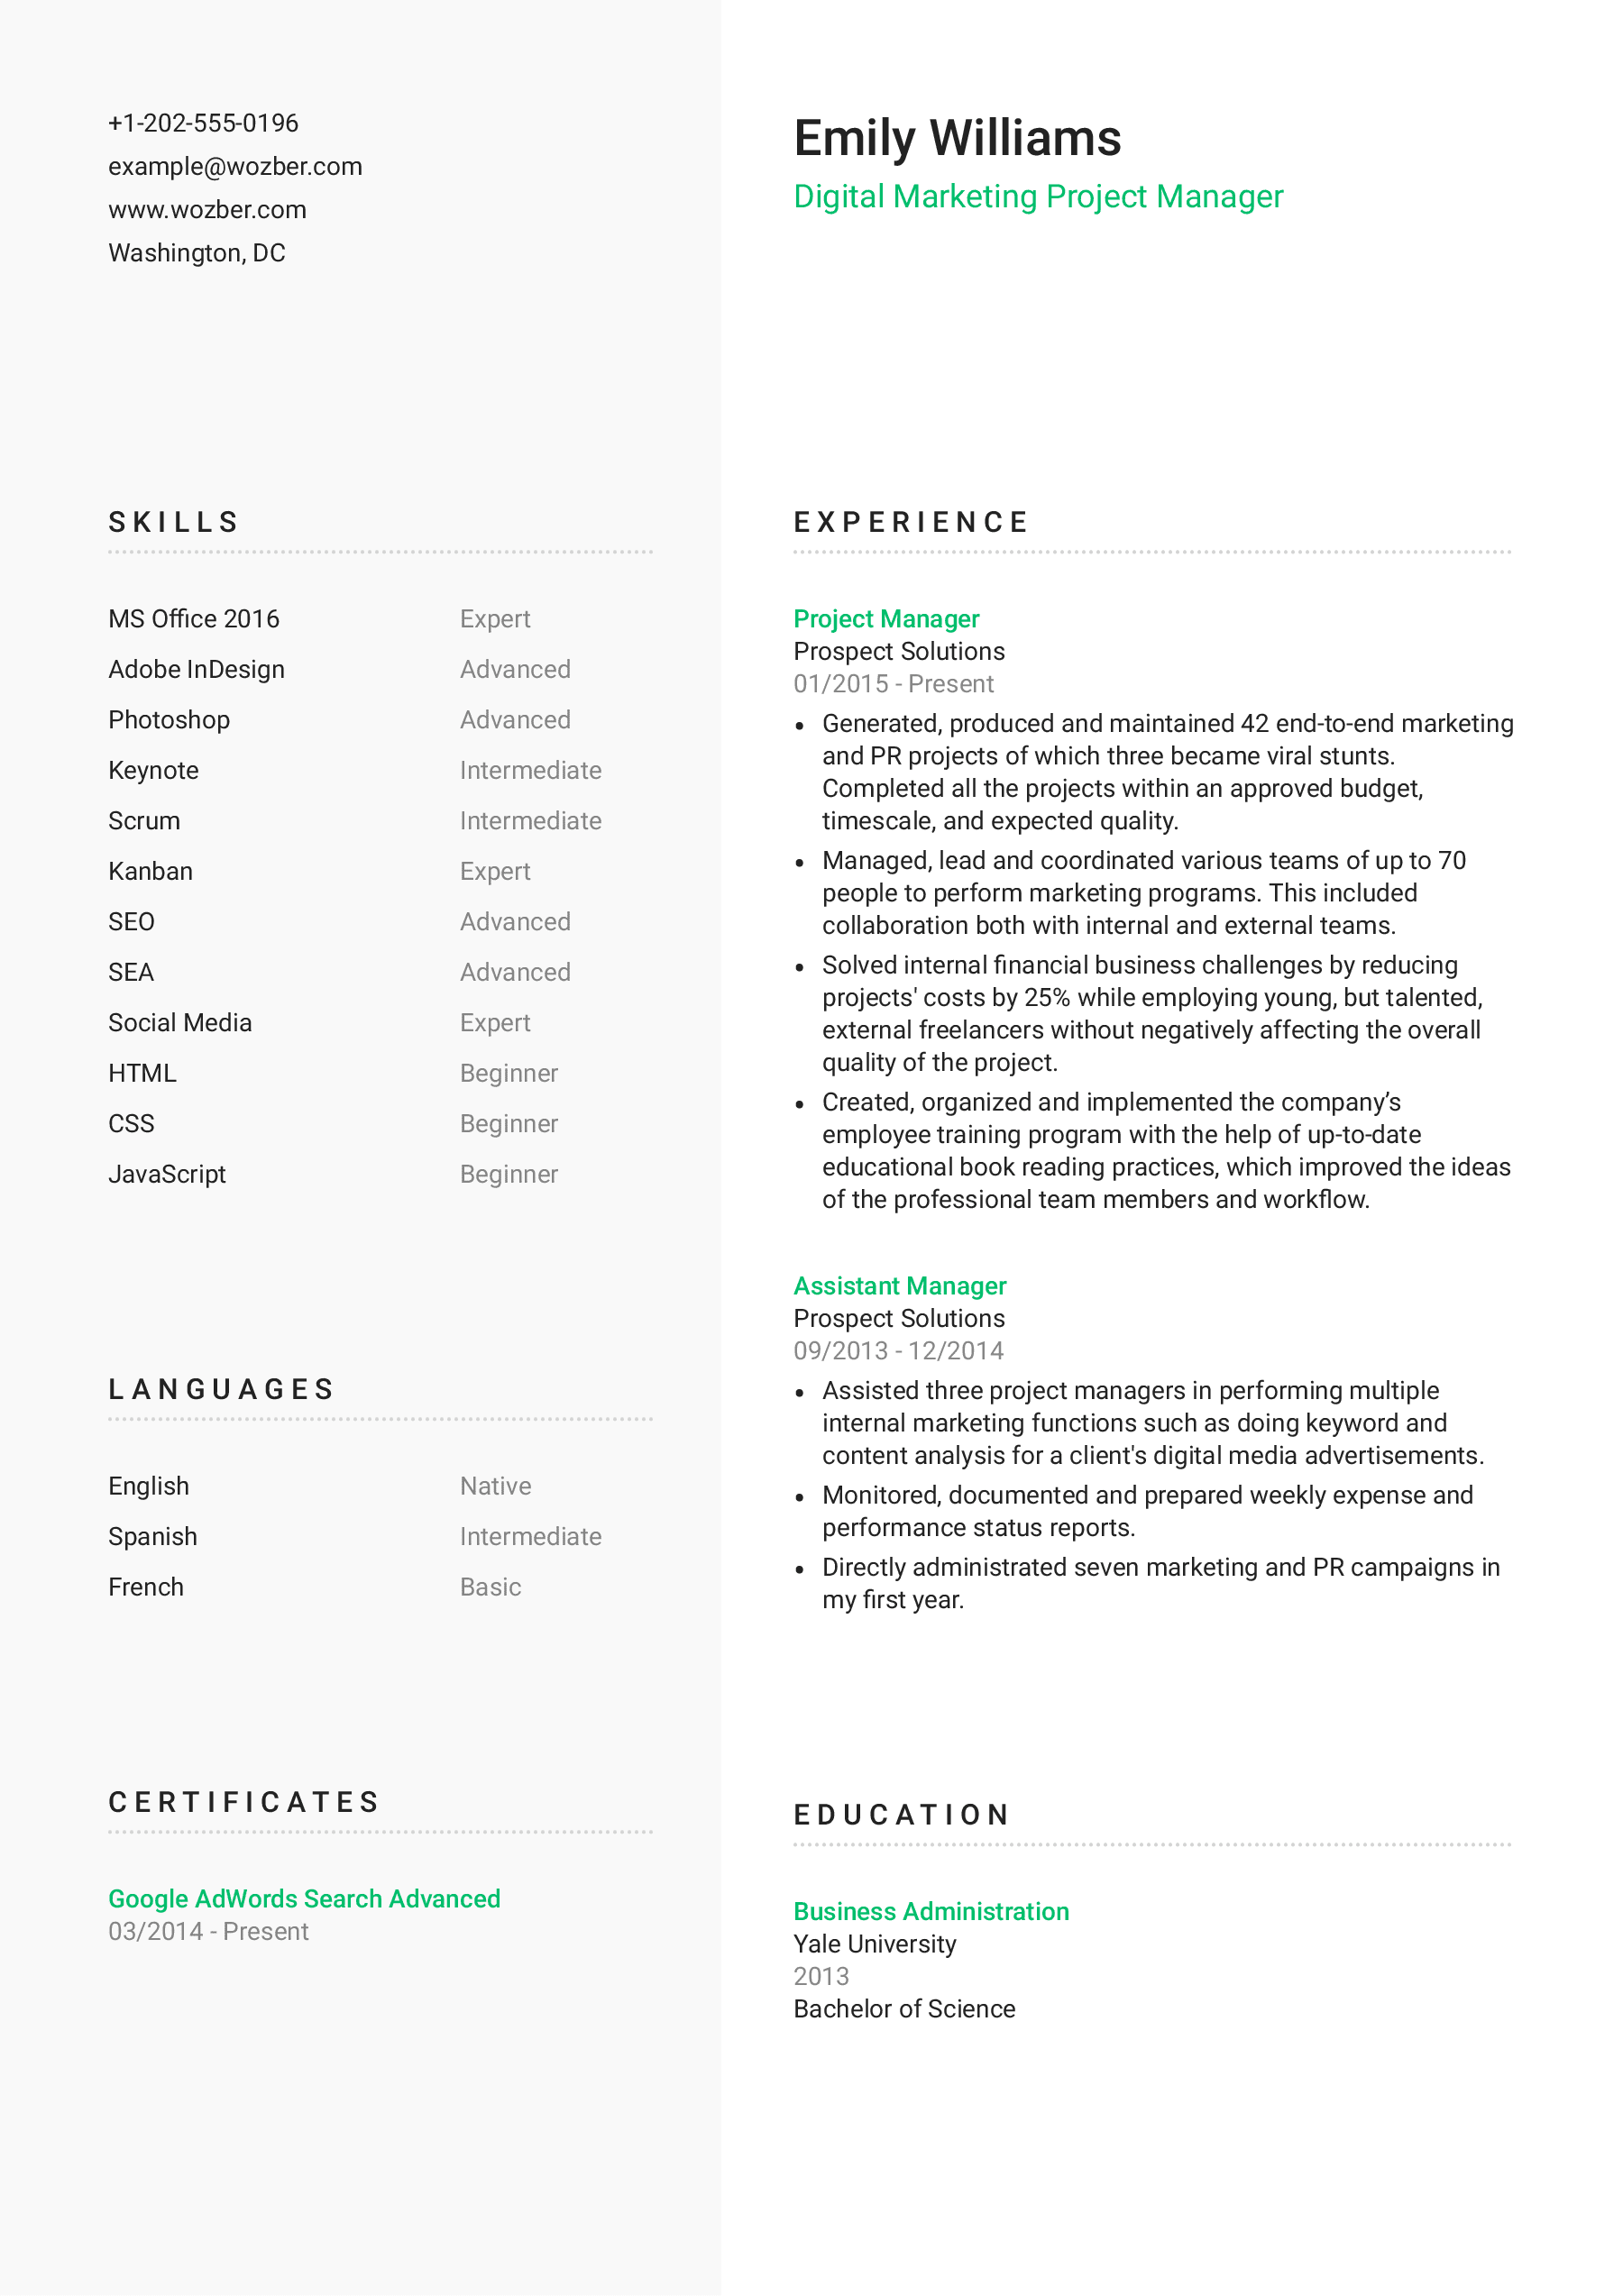 A modern two-column CV template for those who prefer an attractive appearance.